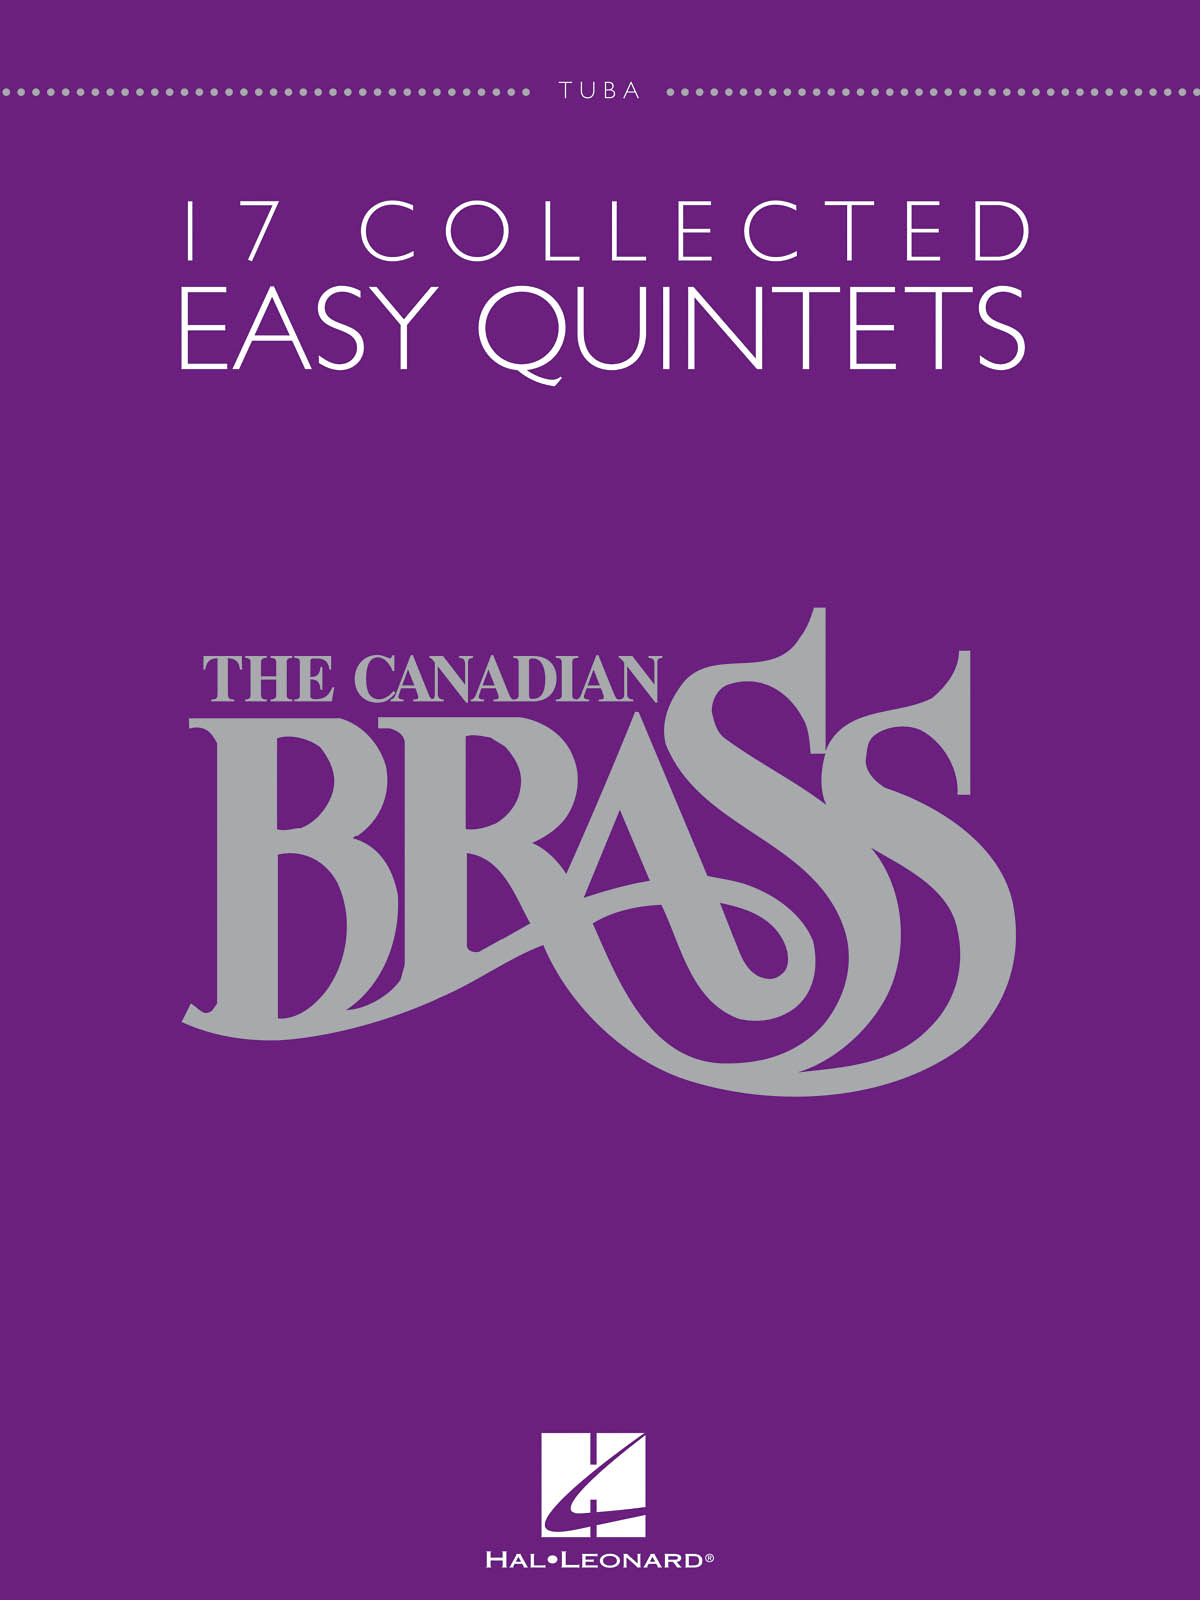 The Canadian Brass – 17 Collected Easy Quintets